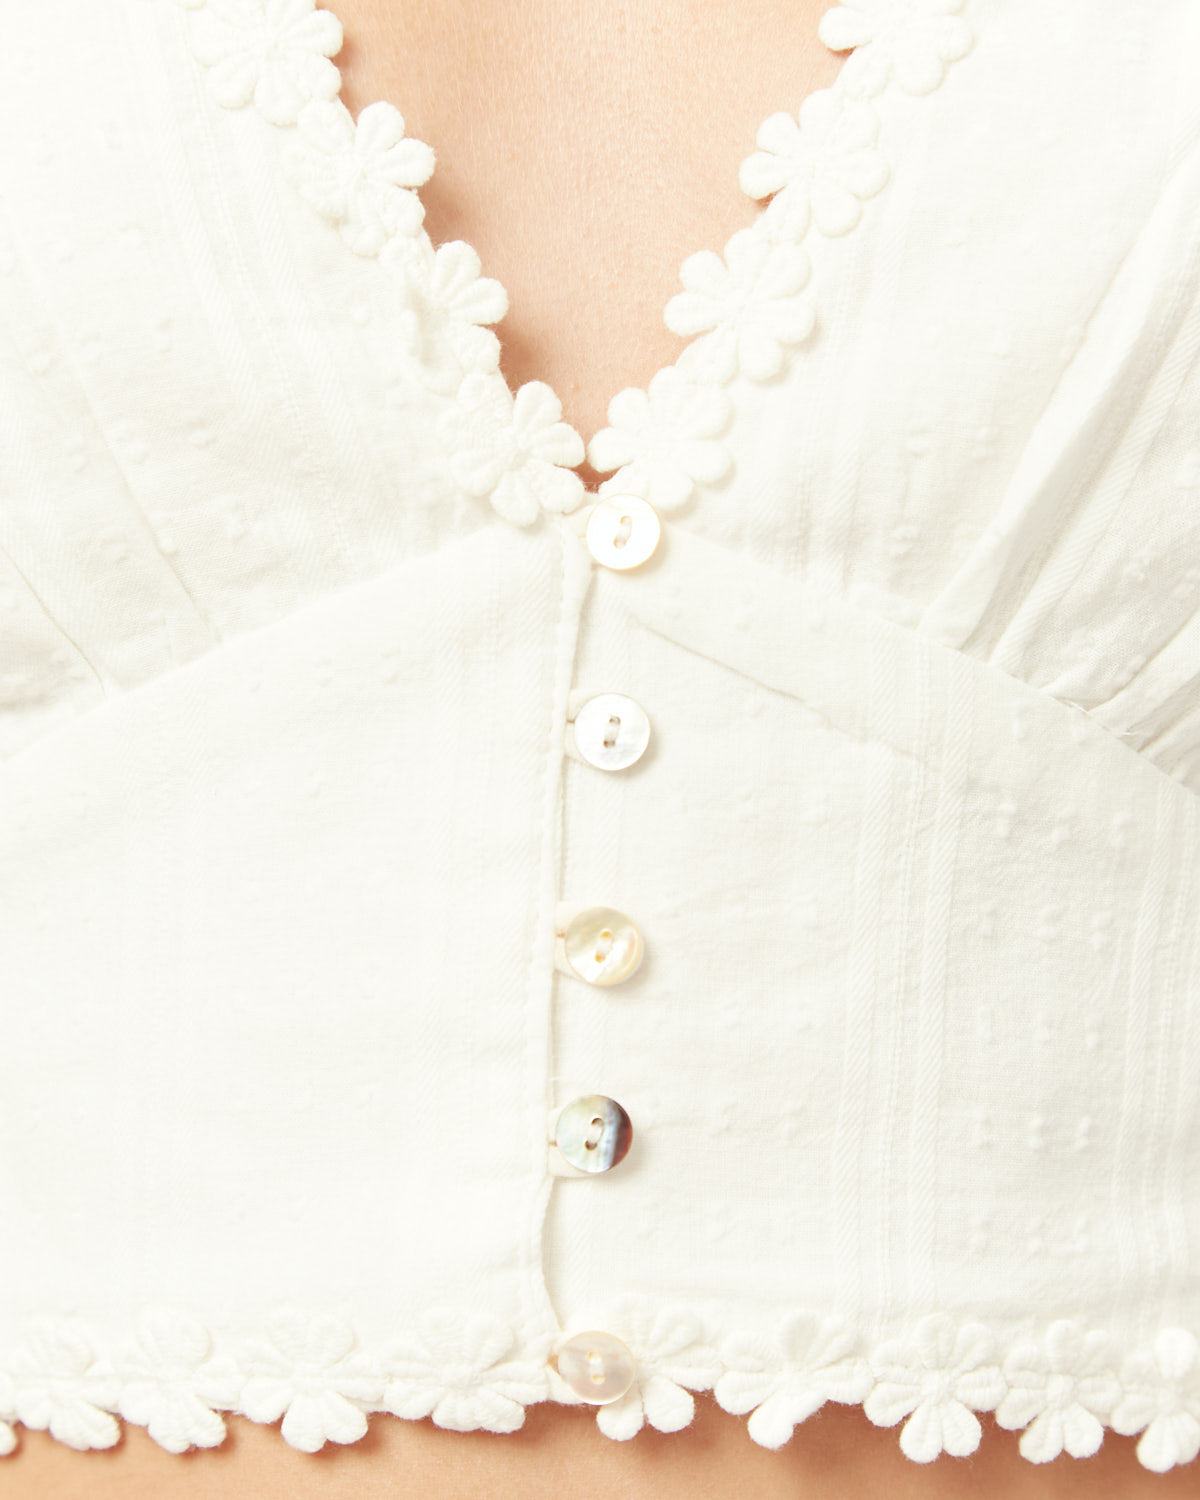 Close up of the kimberly v neck button down white top